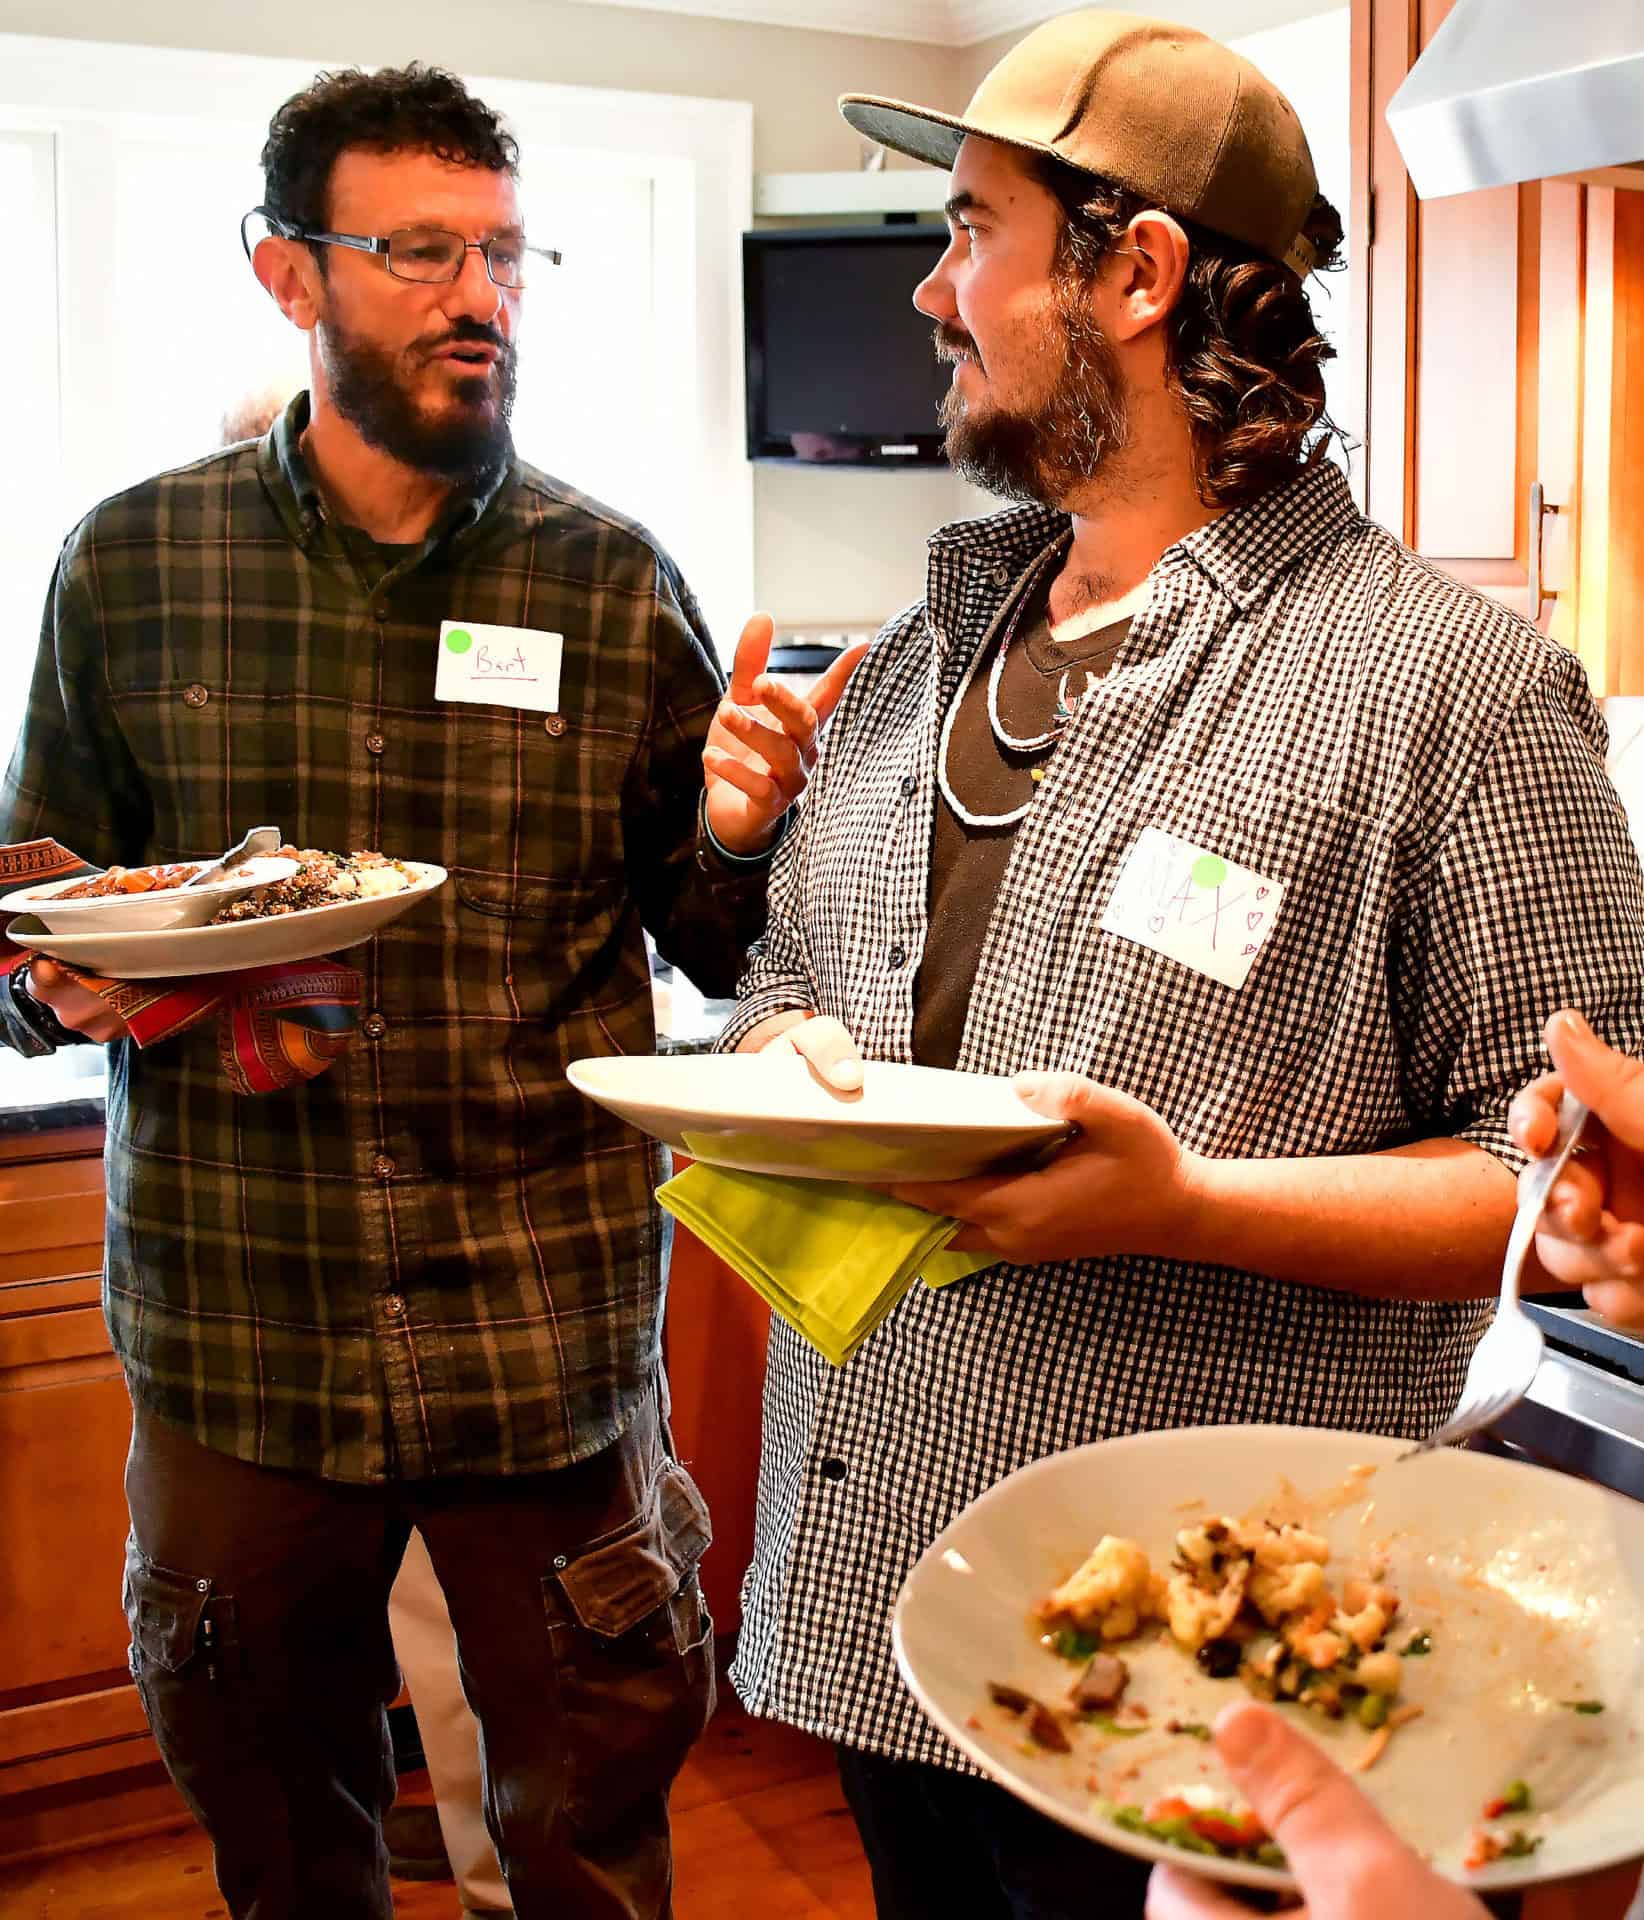 From left, Bart Church, Max Rivinus and Ryan Stufano share conversation during a potluck in Sheffield for 